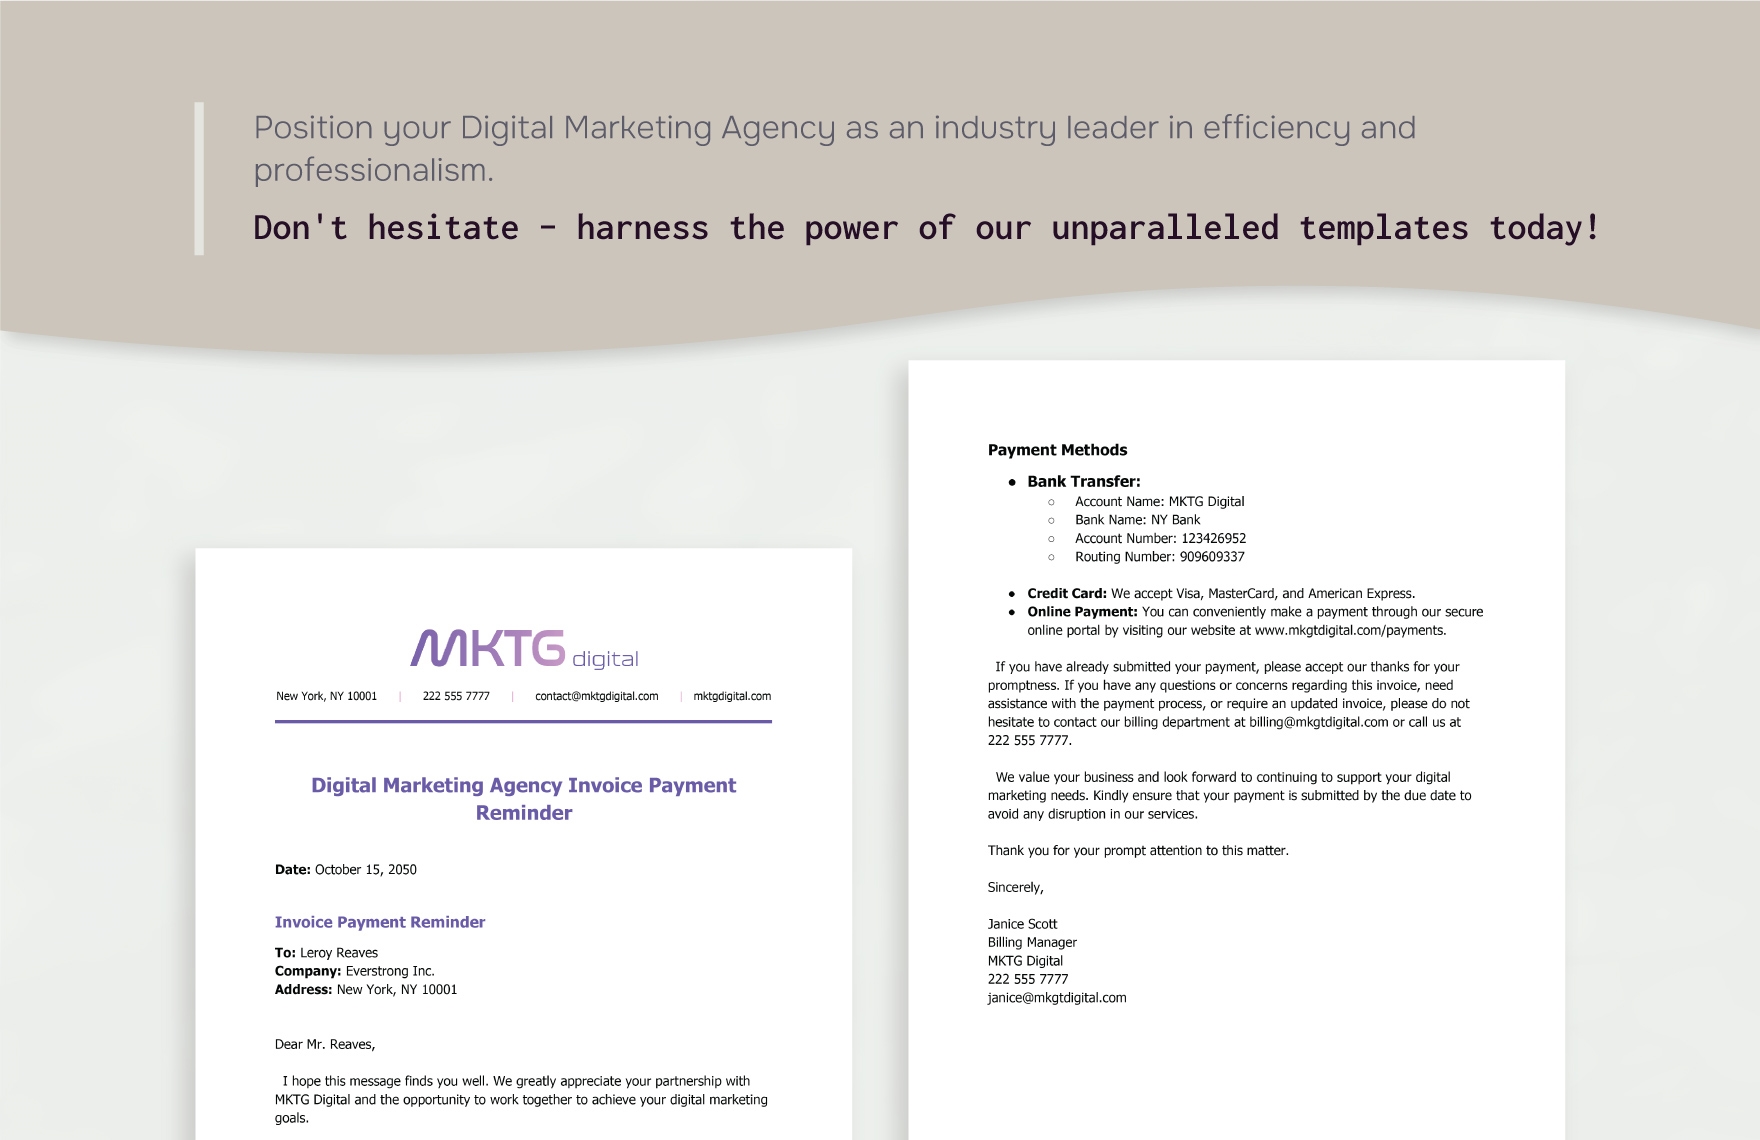 Digital Marketing Agency Invoice Payment Reminder Template